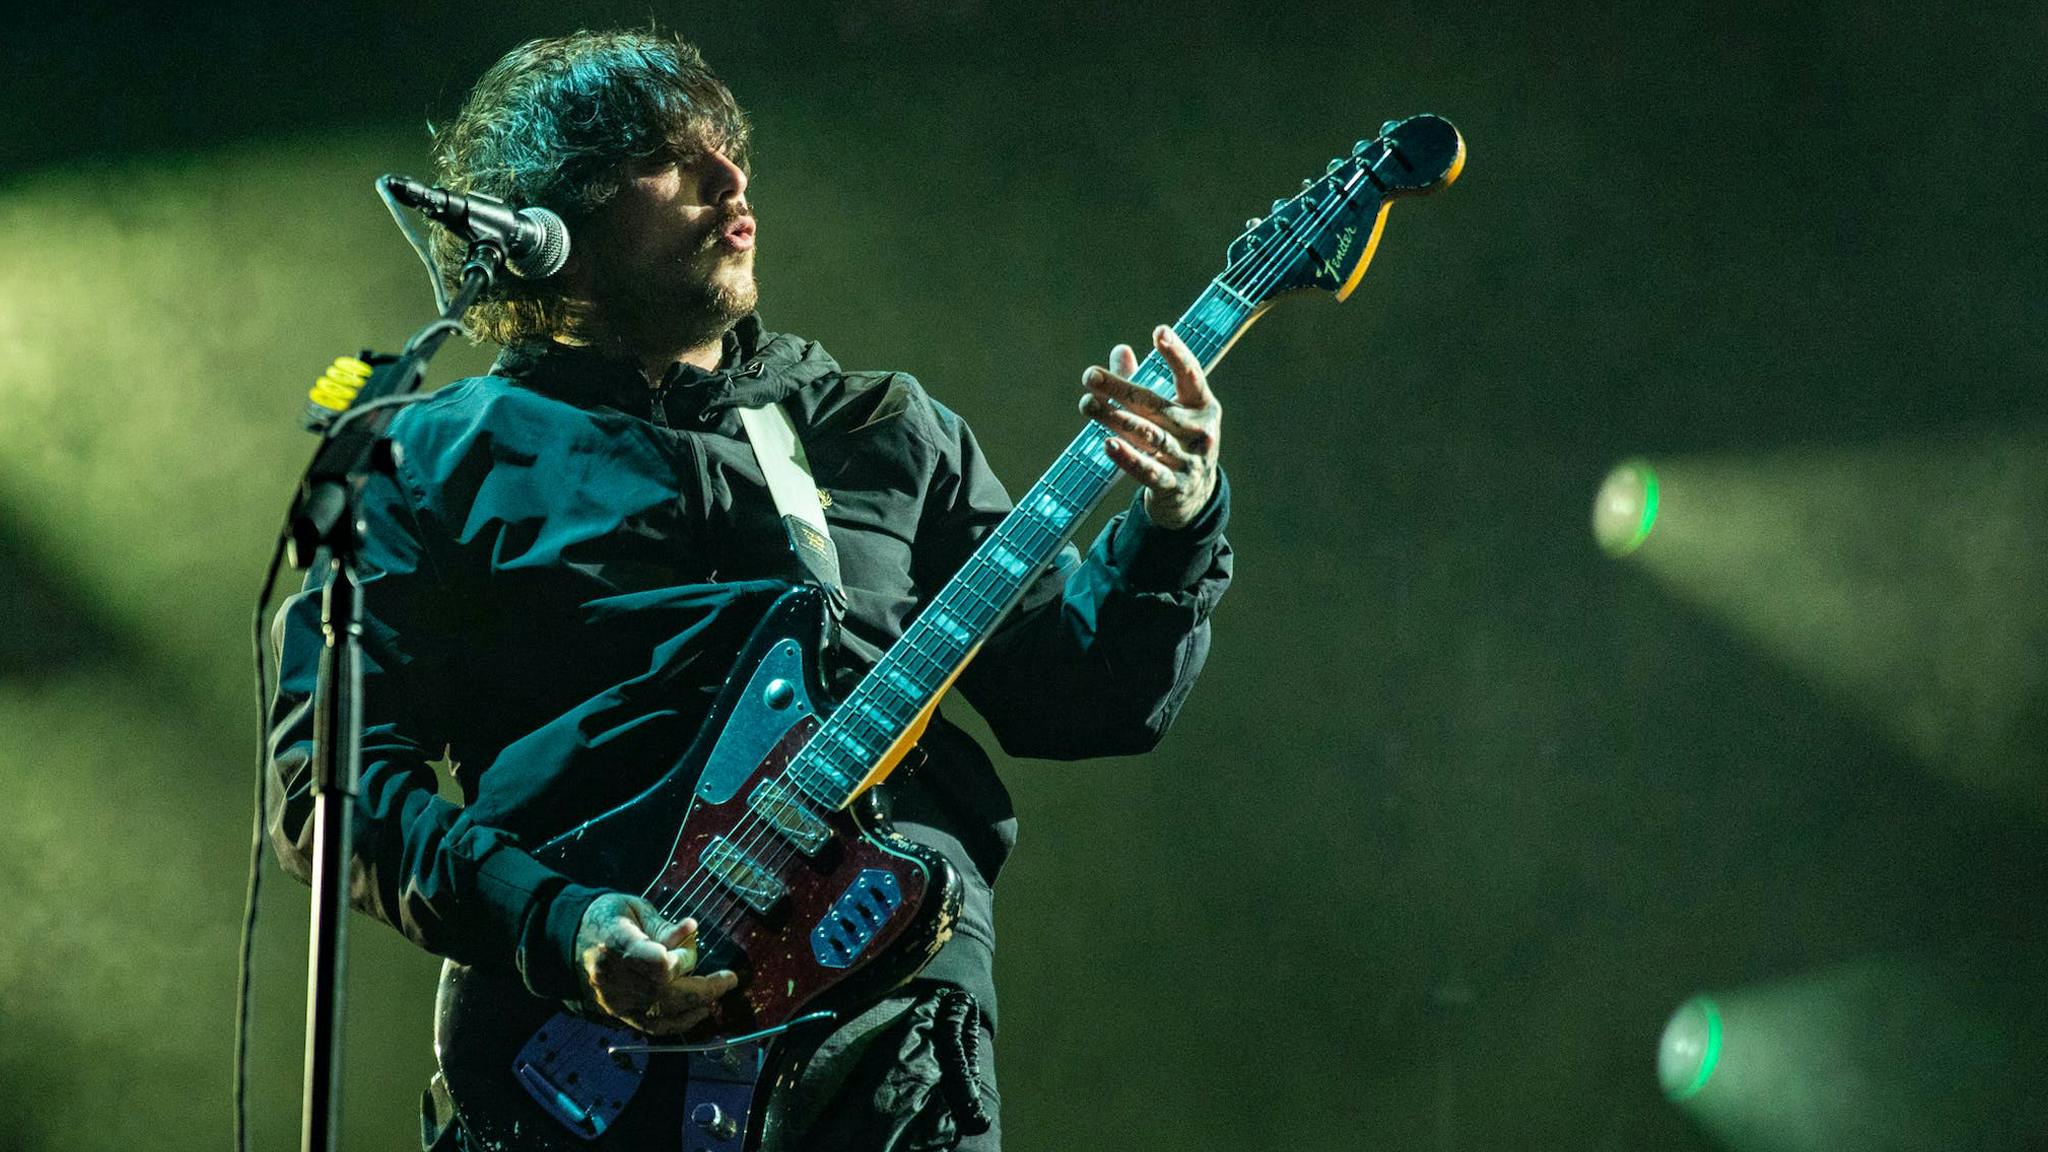 Has Frank Iero just started teasing his new band?